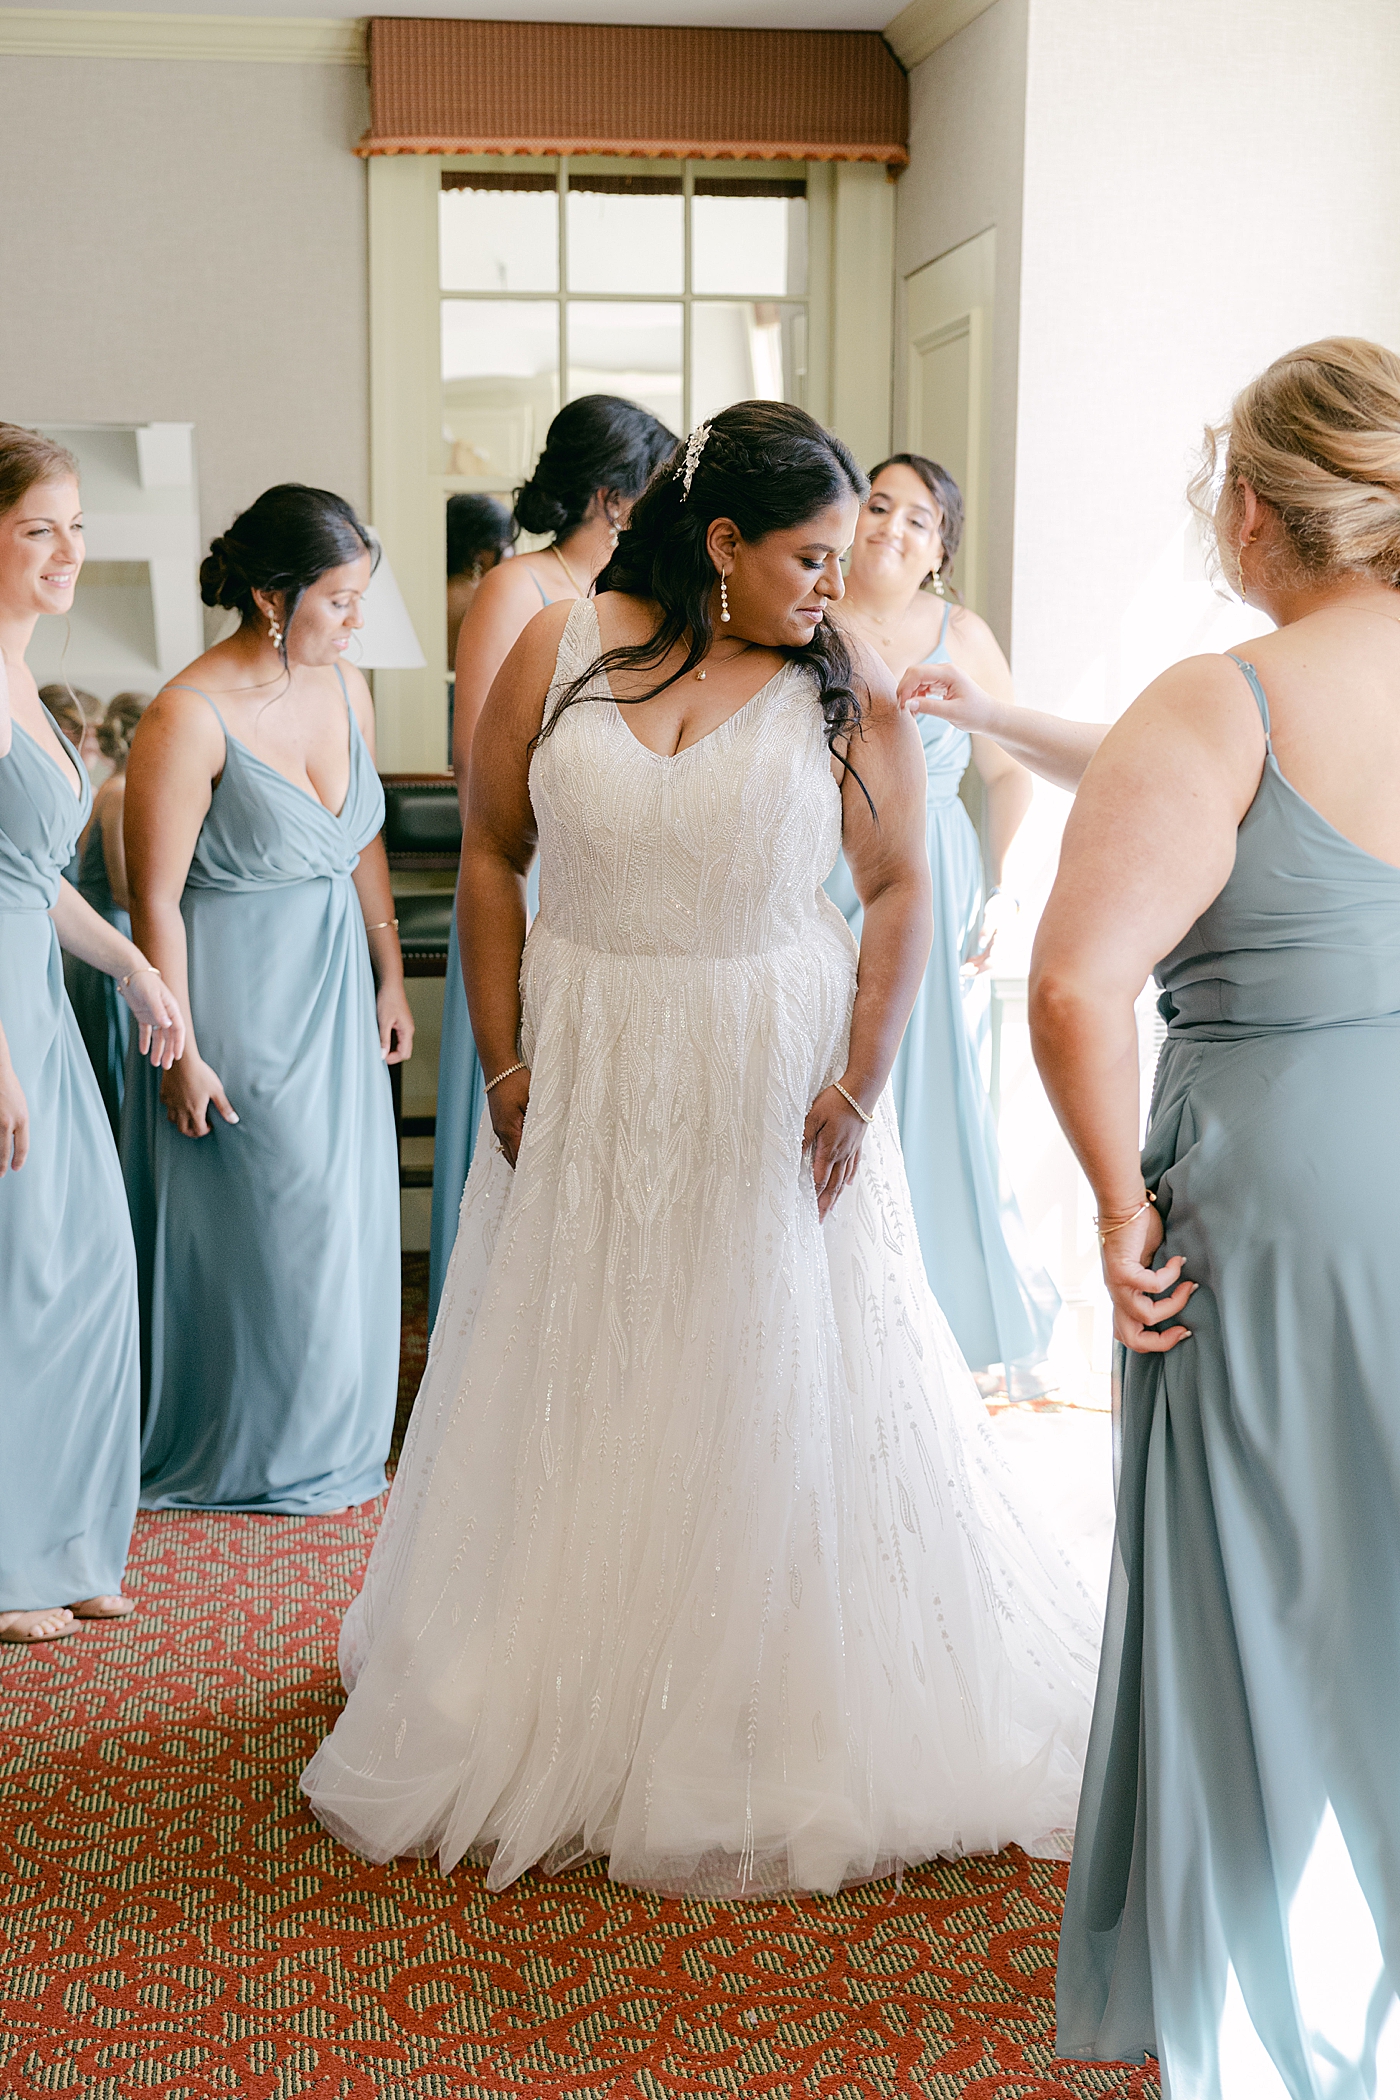 Bridesmaids helping a bride into her wedding dress | Image by Hope Helmuth Photography